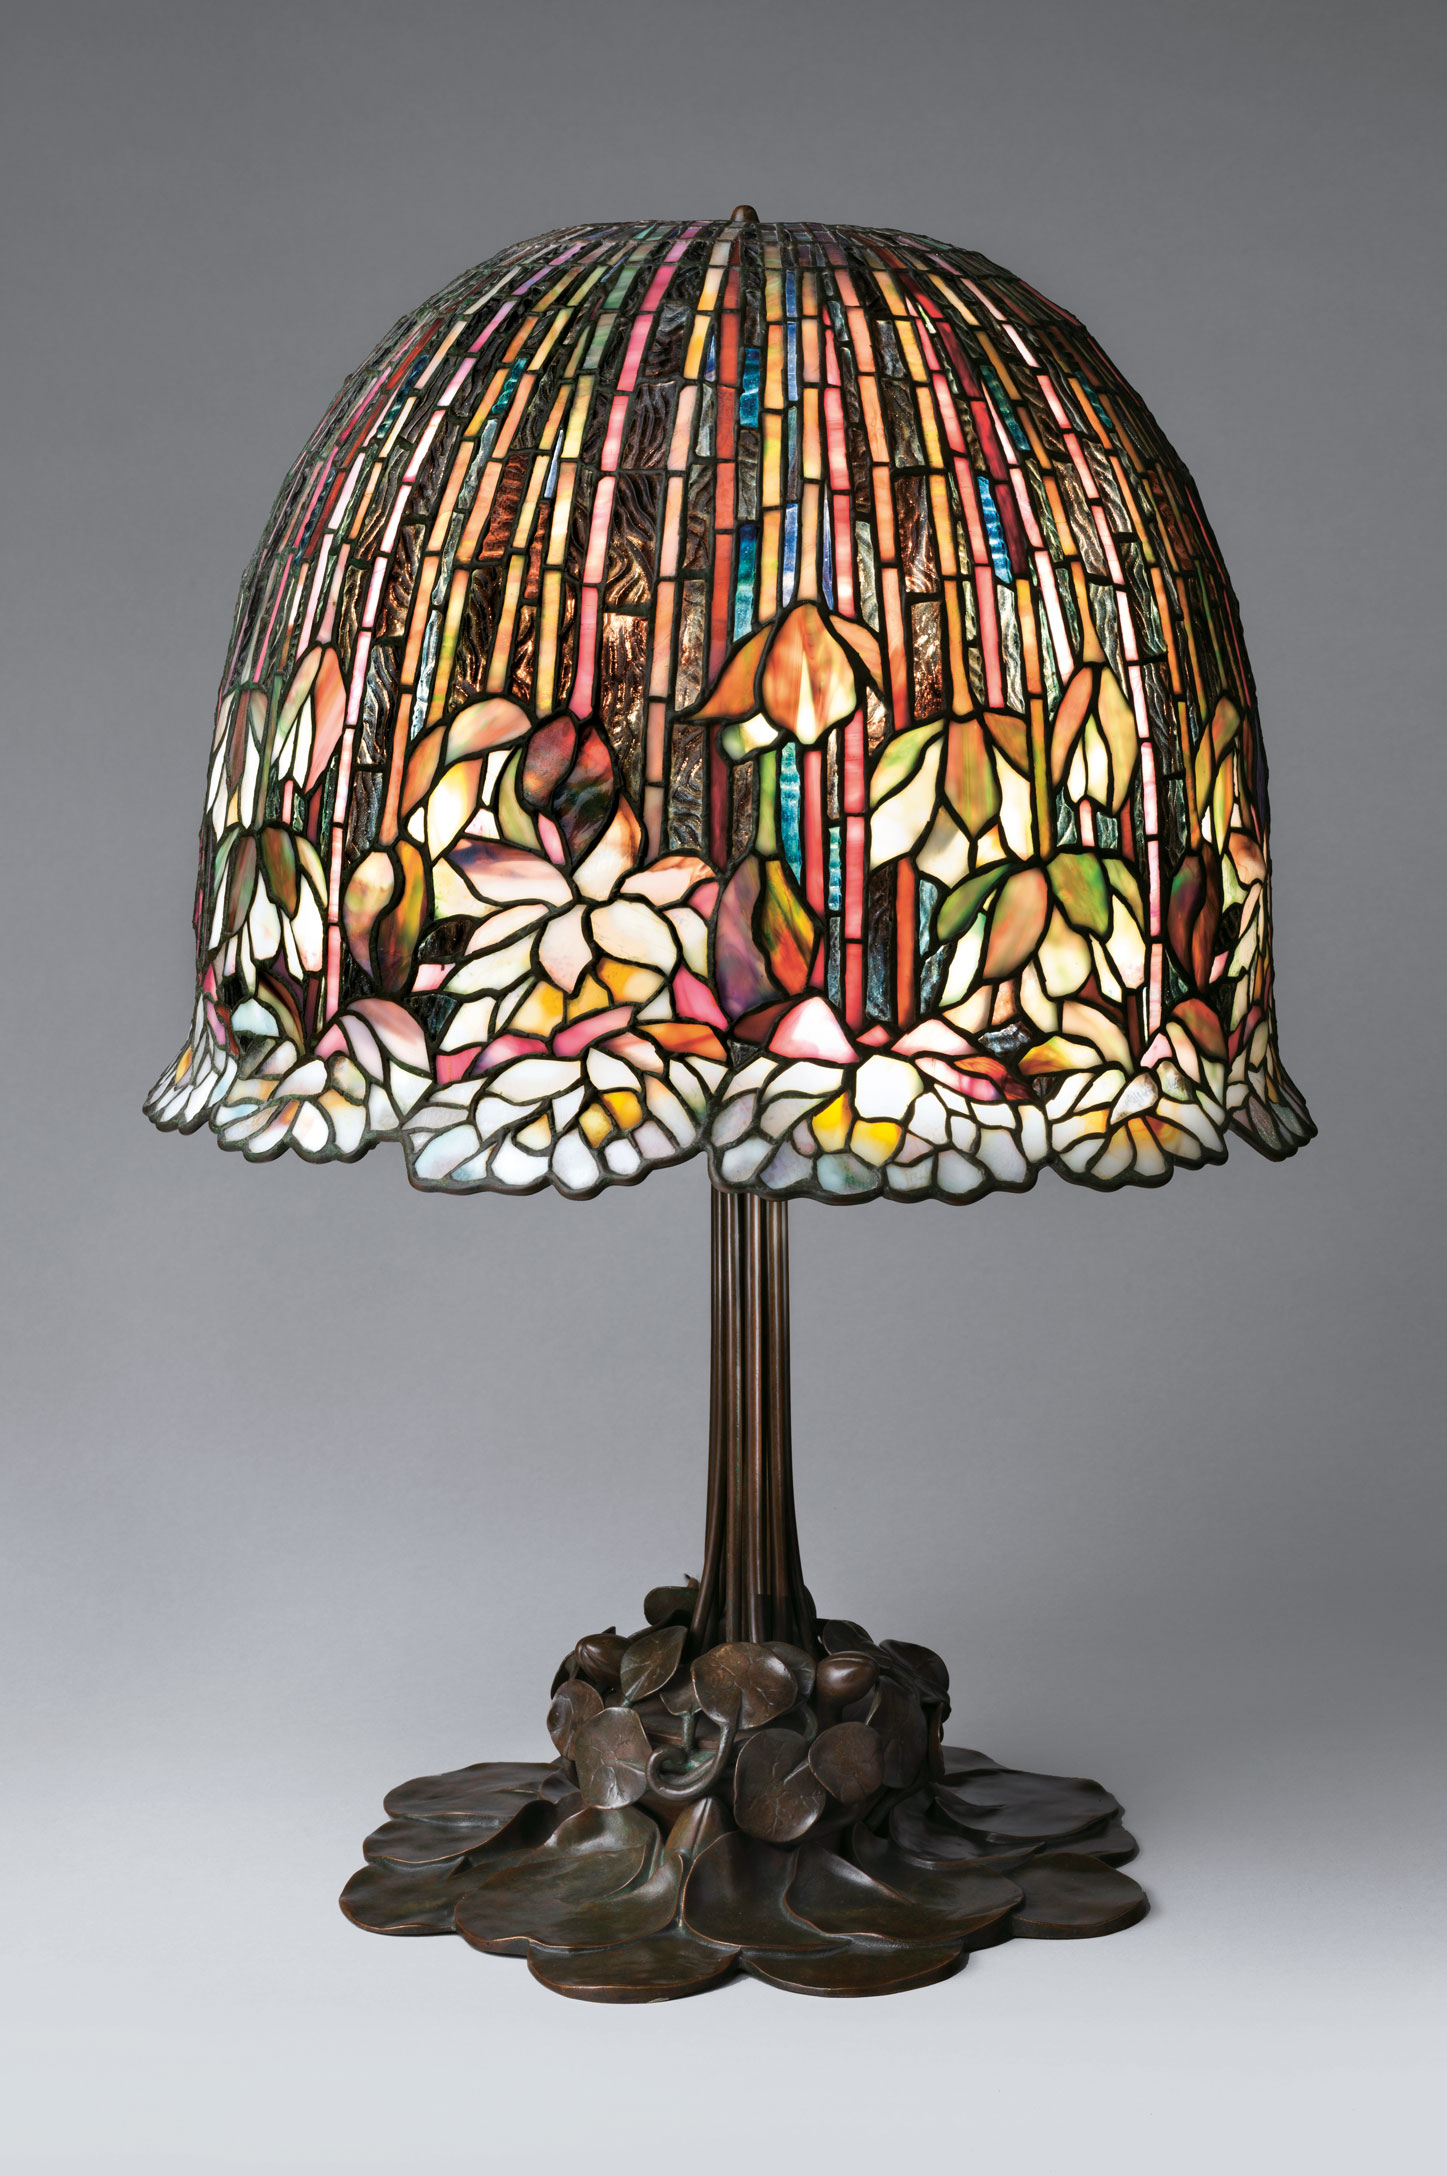 You instantly spot the Tiffany lamp (p.26, fig. 2), because you’ve always loved Tiffany glass. The glass is designed with colours flowers. From Art =